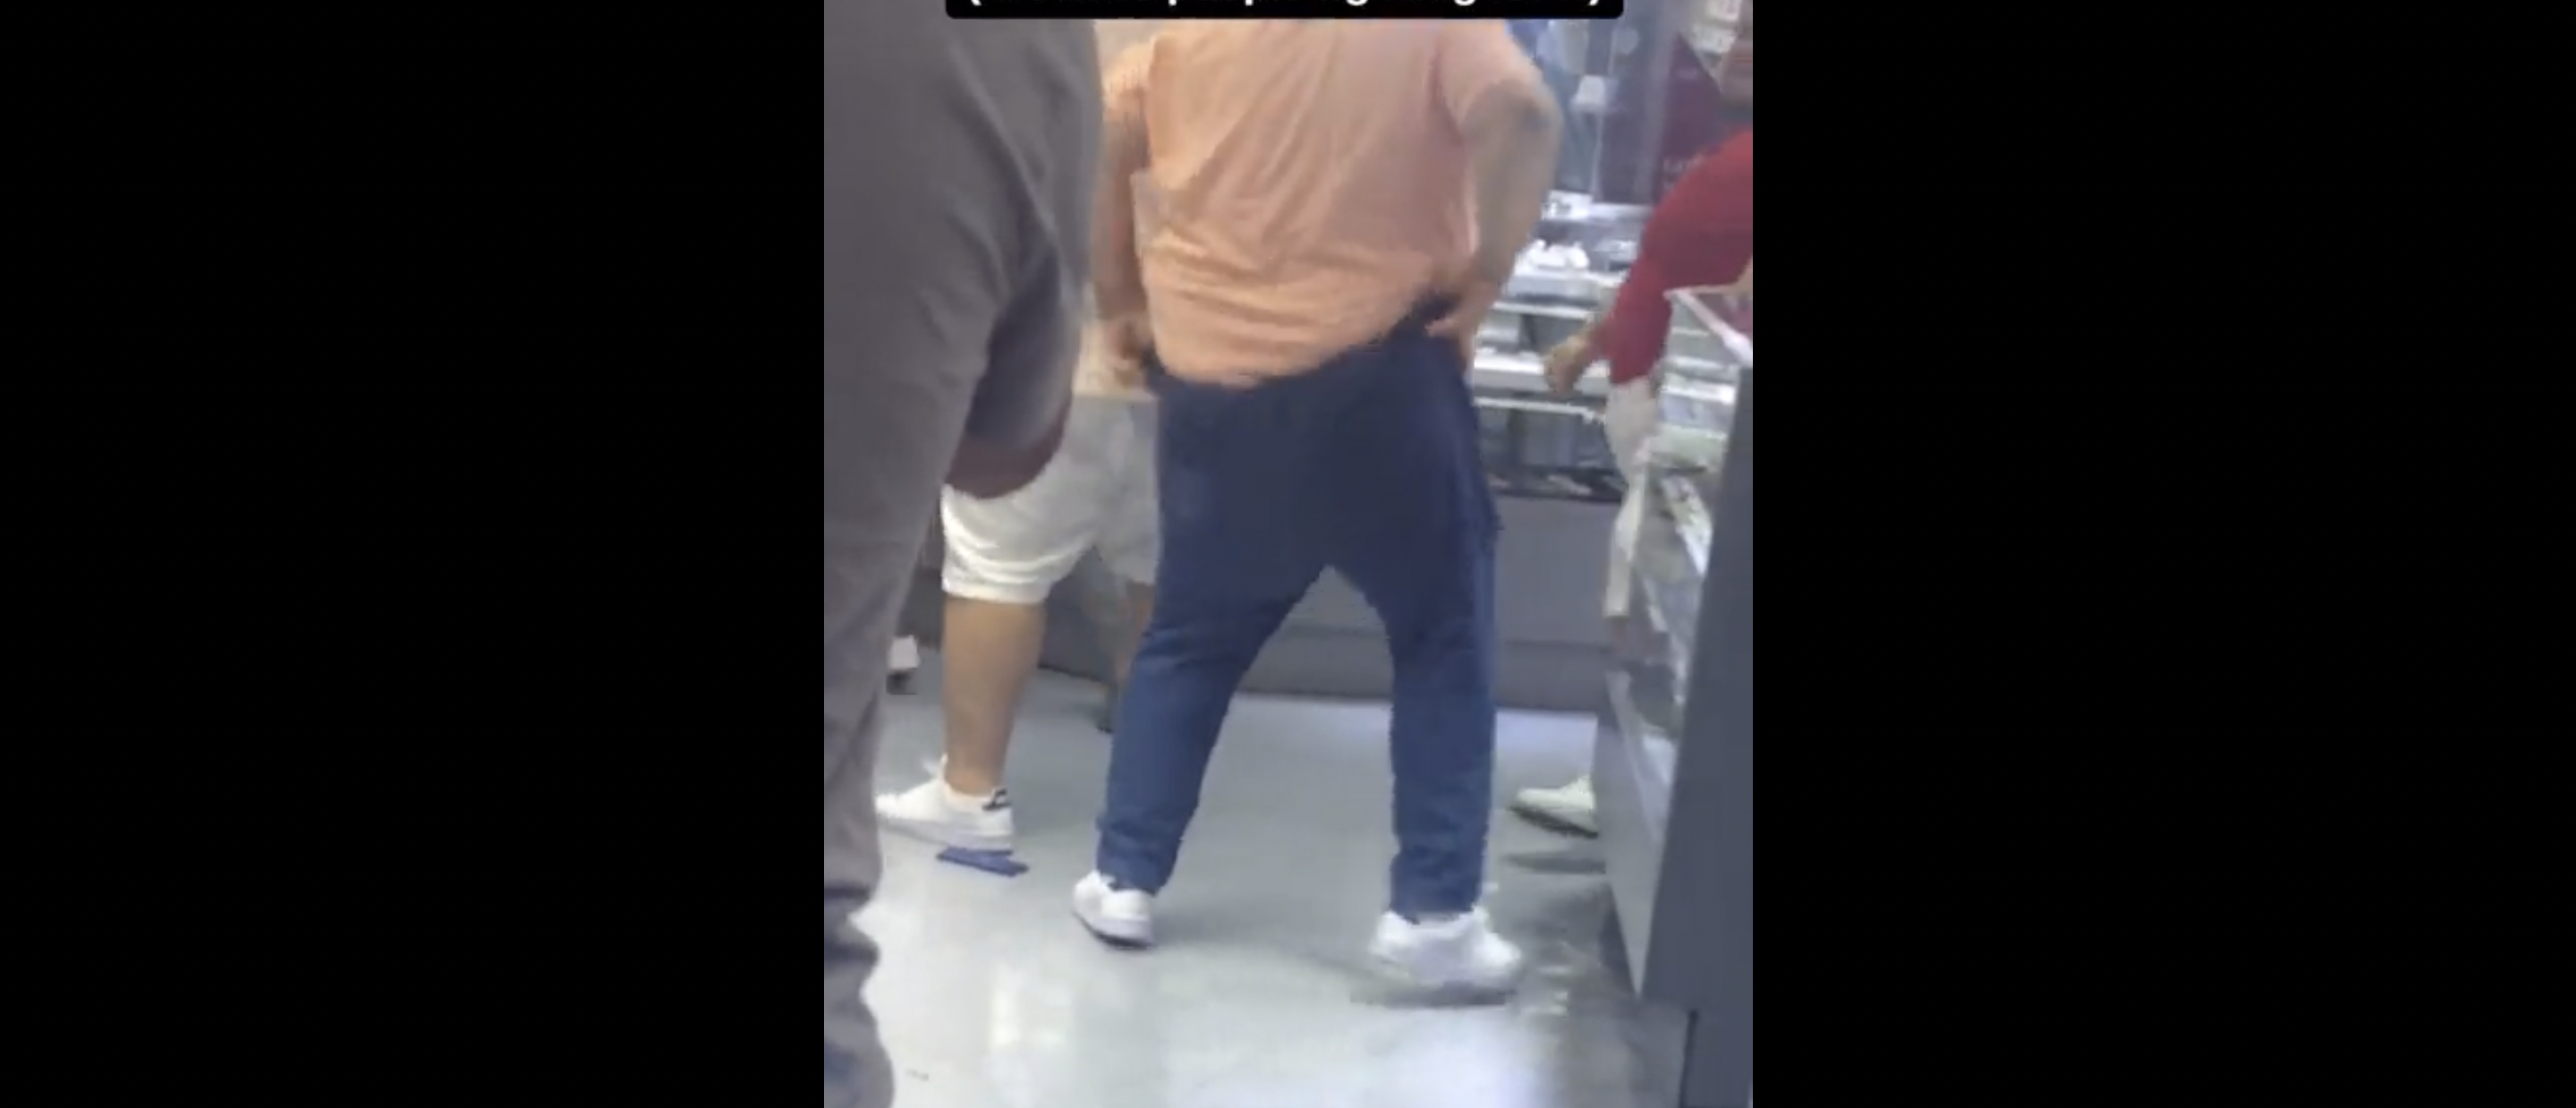 A Bunch Of Fat Dudes Throw Blows At Each Other While One Guy's Pants Keep Falling  Down